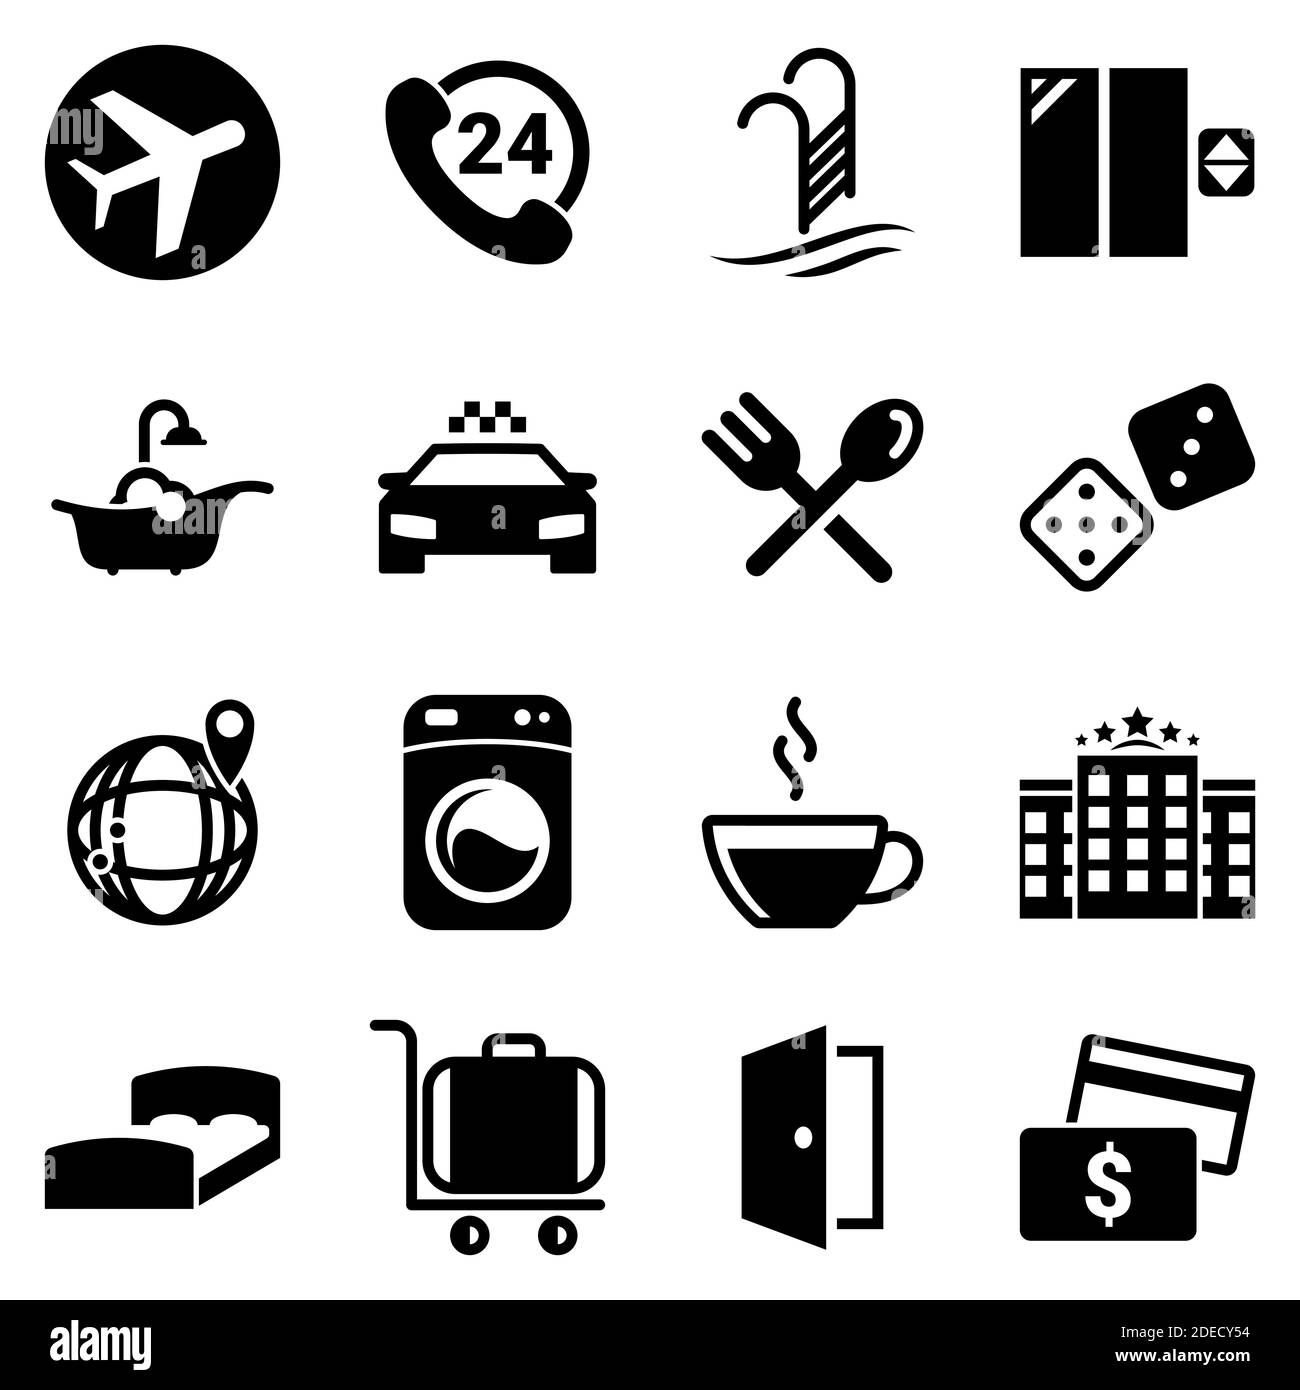 Set of simple icons on a theme Hotel, overnight, moving, vector, design, collection, flat, sign, symbol,element, object, illustration. Black icons iso Stock Vector